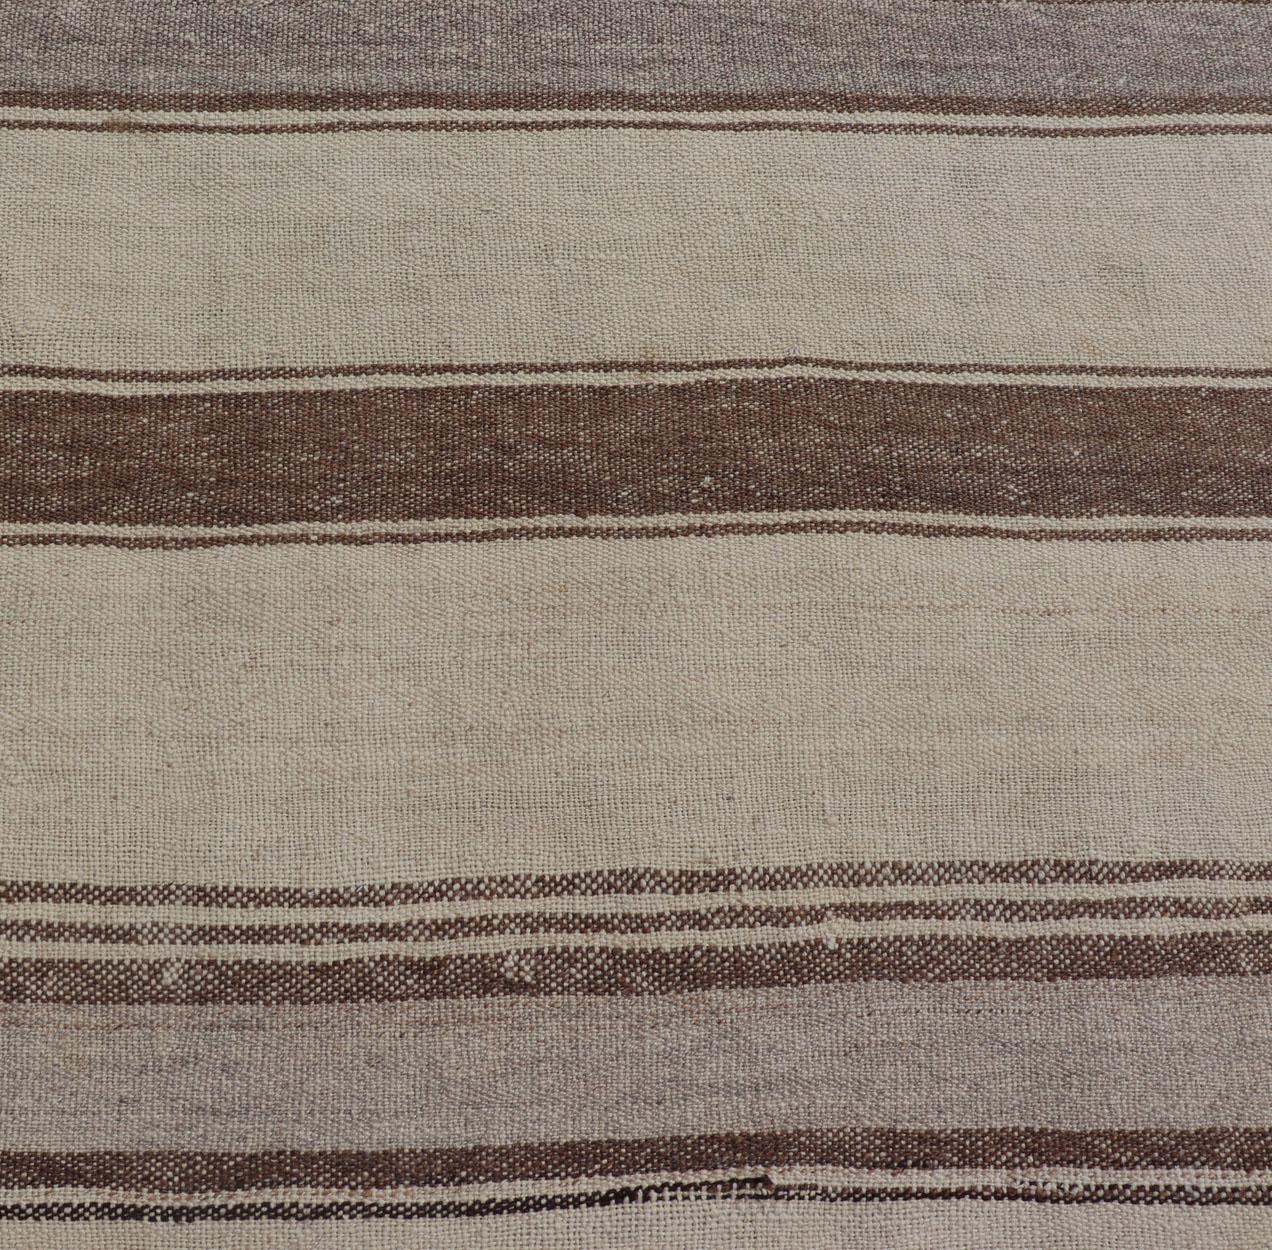 Vintage Turkish Kilim with Stripes in Tan, Gray, Taupe, Cream & Brown For Sale 2